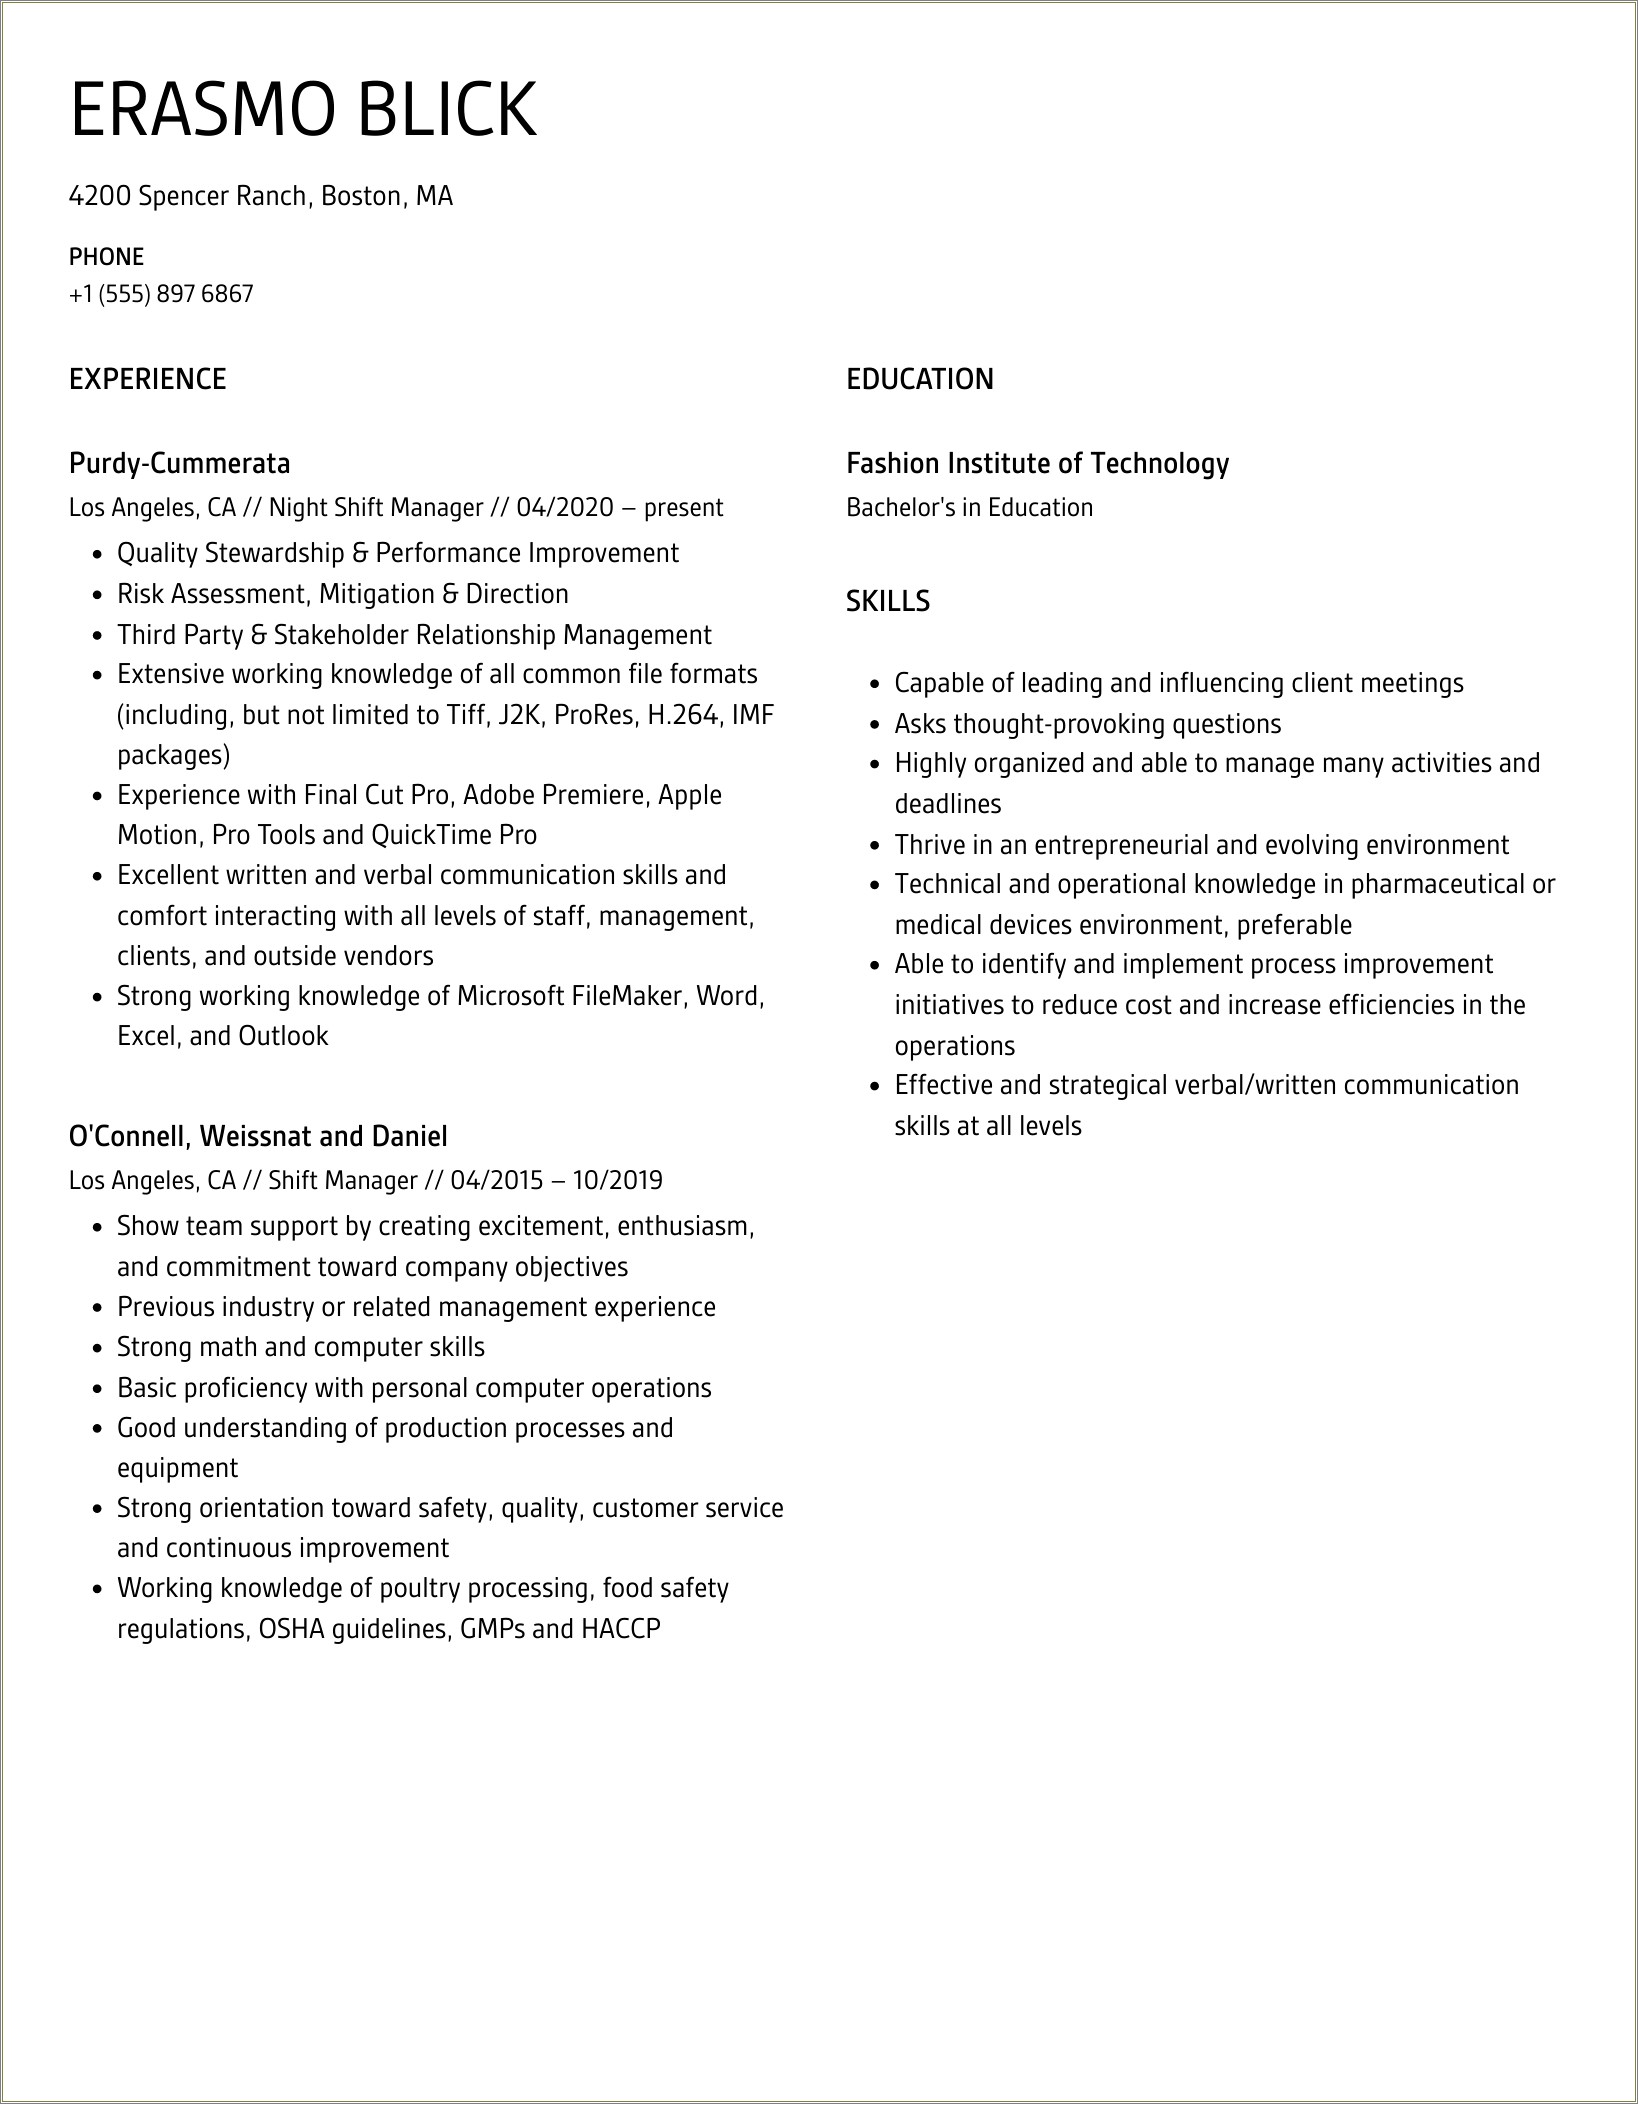 Highlighting Shift Manager Skills From Retail On Resume